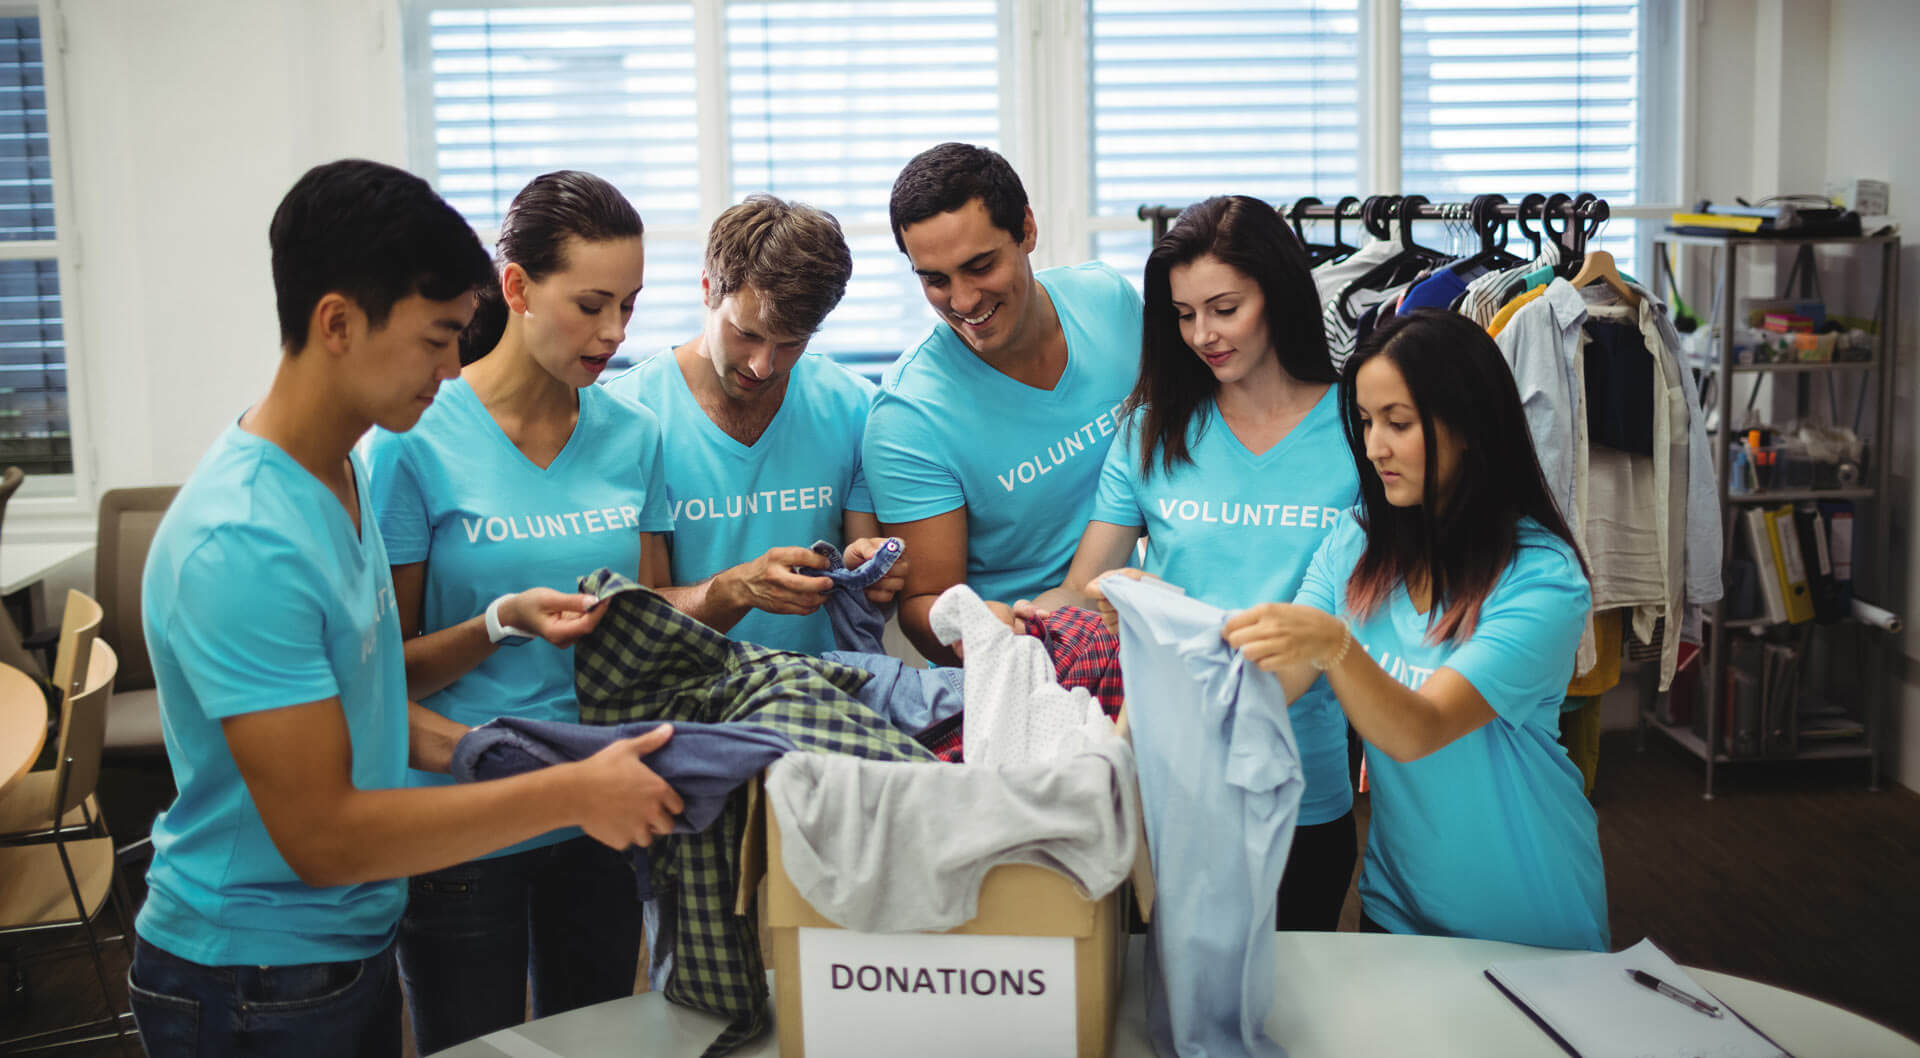 Social responsibility: How to help those who need it the most